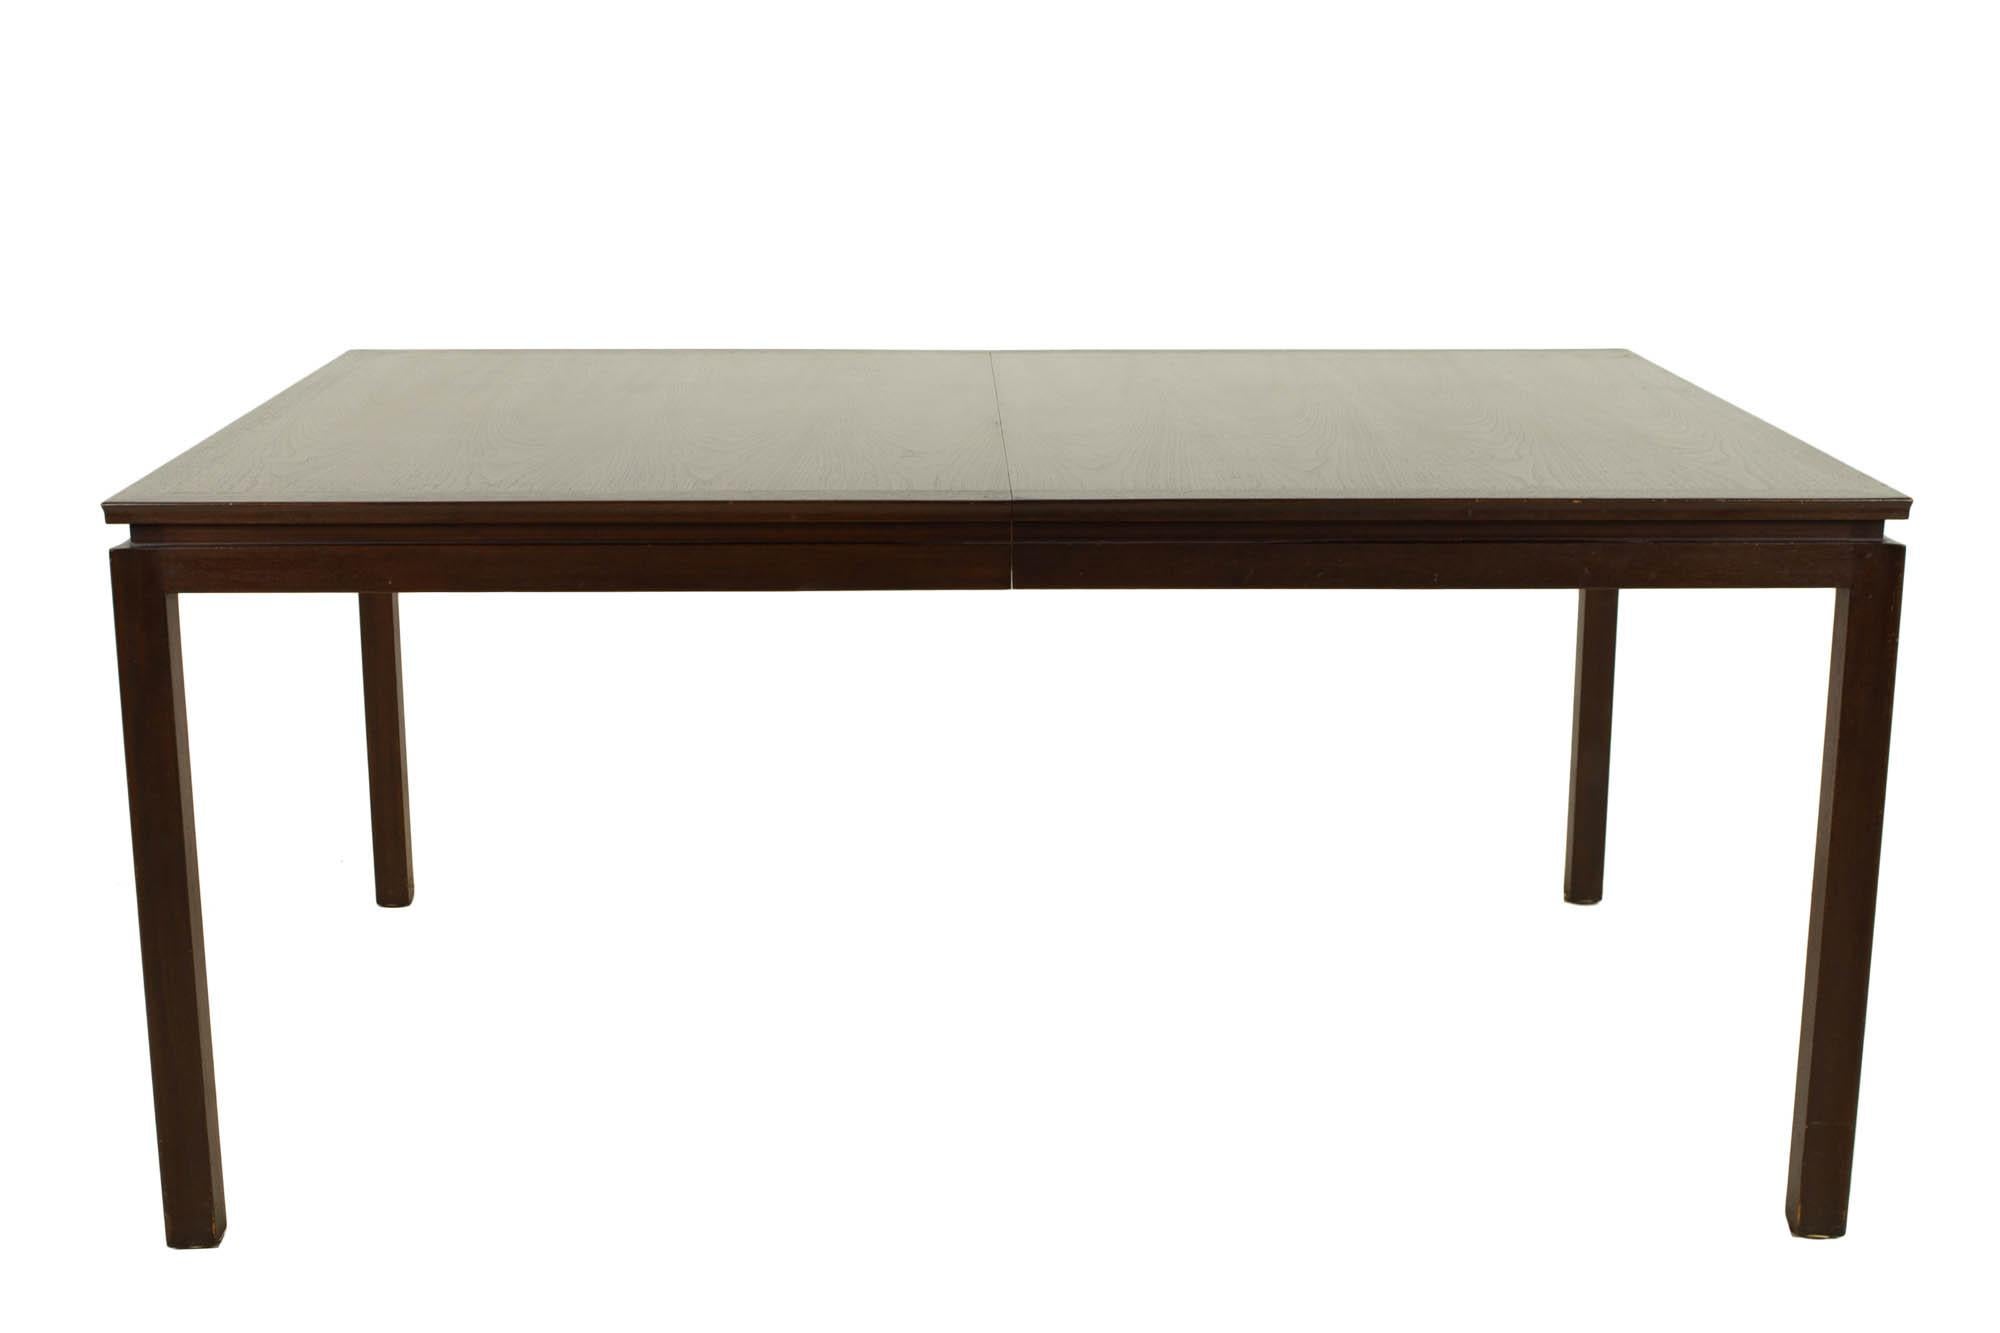 Edward Wormley for Dunbar midcentury dining table

This table measures: 66 wide x 44 deep x 30 inches high, and each of the 2 leaves are 24 wide with a total width of the table 114 inches

?All pieces of furniture can be had in what we call